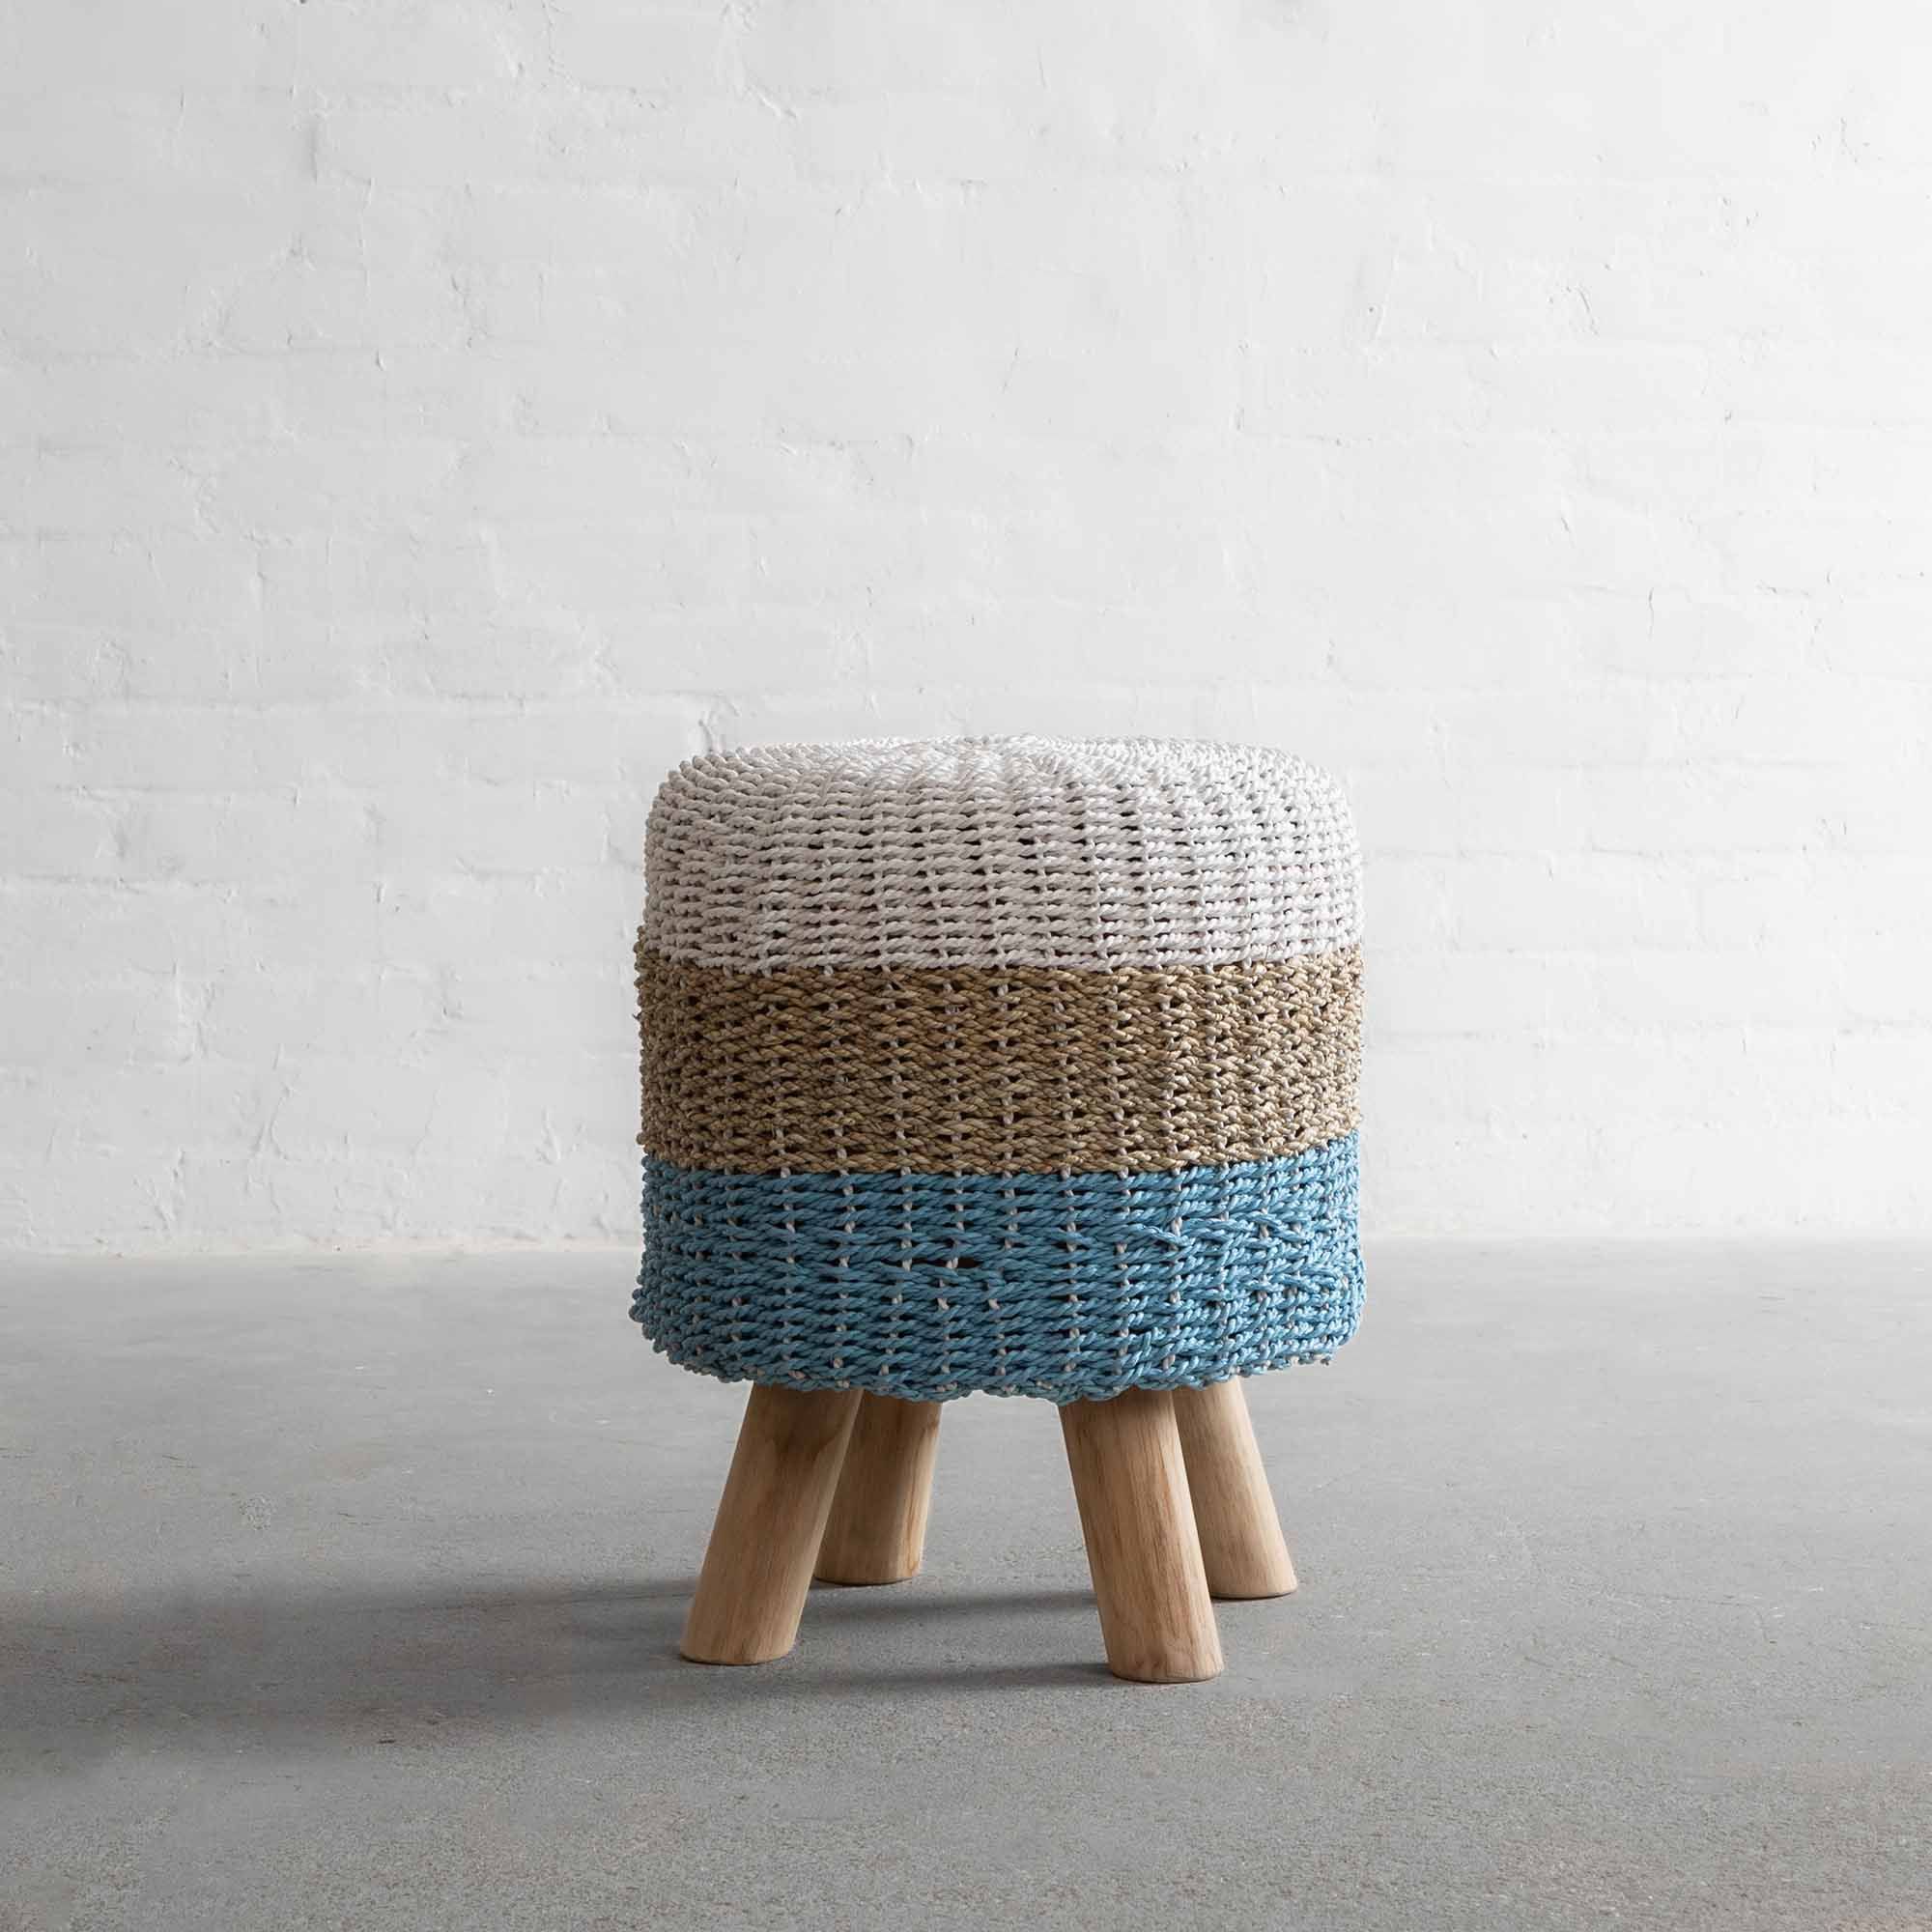 Well Known Polyester Handwoven Ottomans Intended For Langkawi Handwoven Ottoman – White Natural Aqua (View 10 of 15)